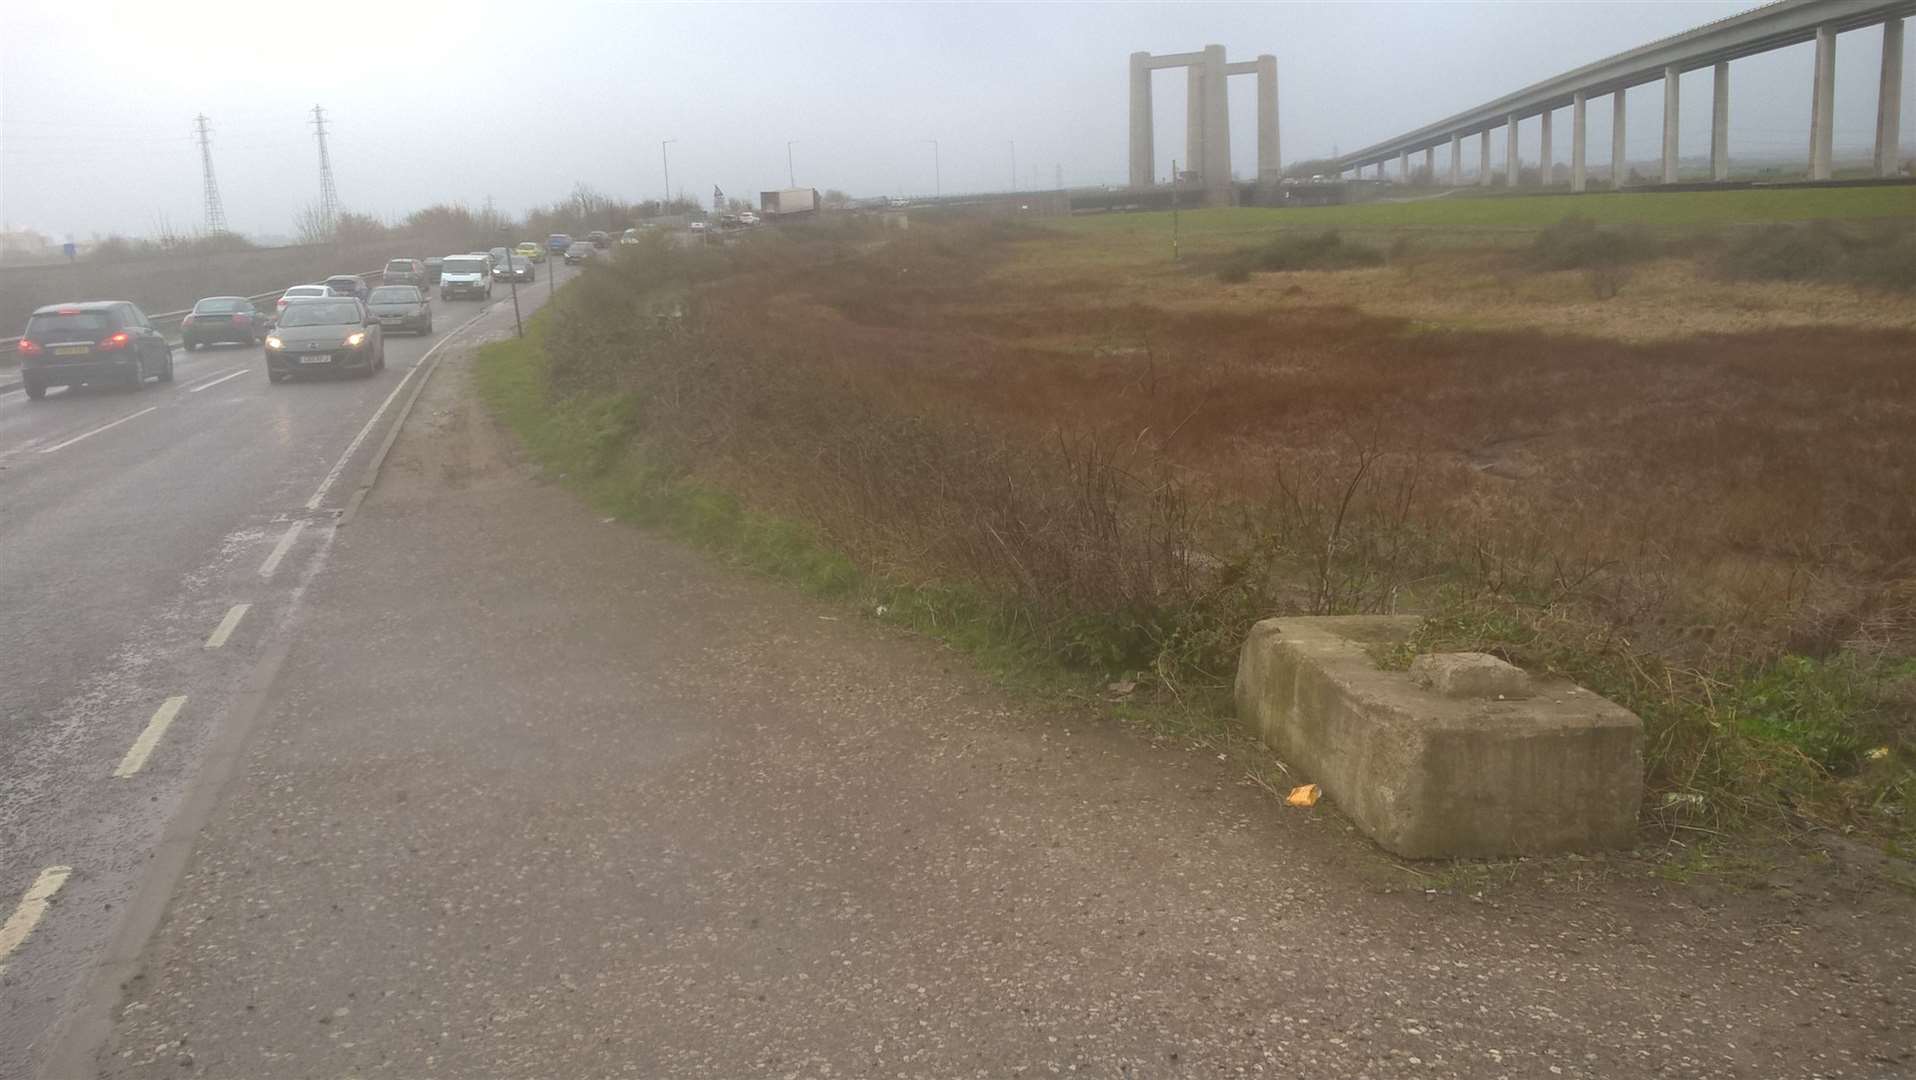 Queues at the Kingsferry Bridge, Sheppey, caused by temporarty traffic lights. Picture: Colin Johnson (28755055)